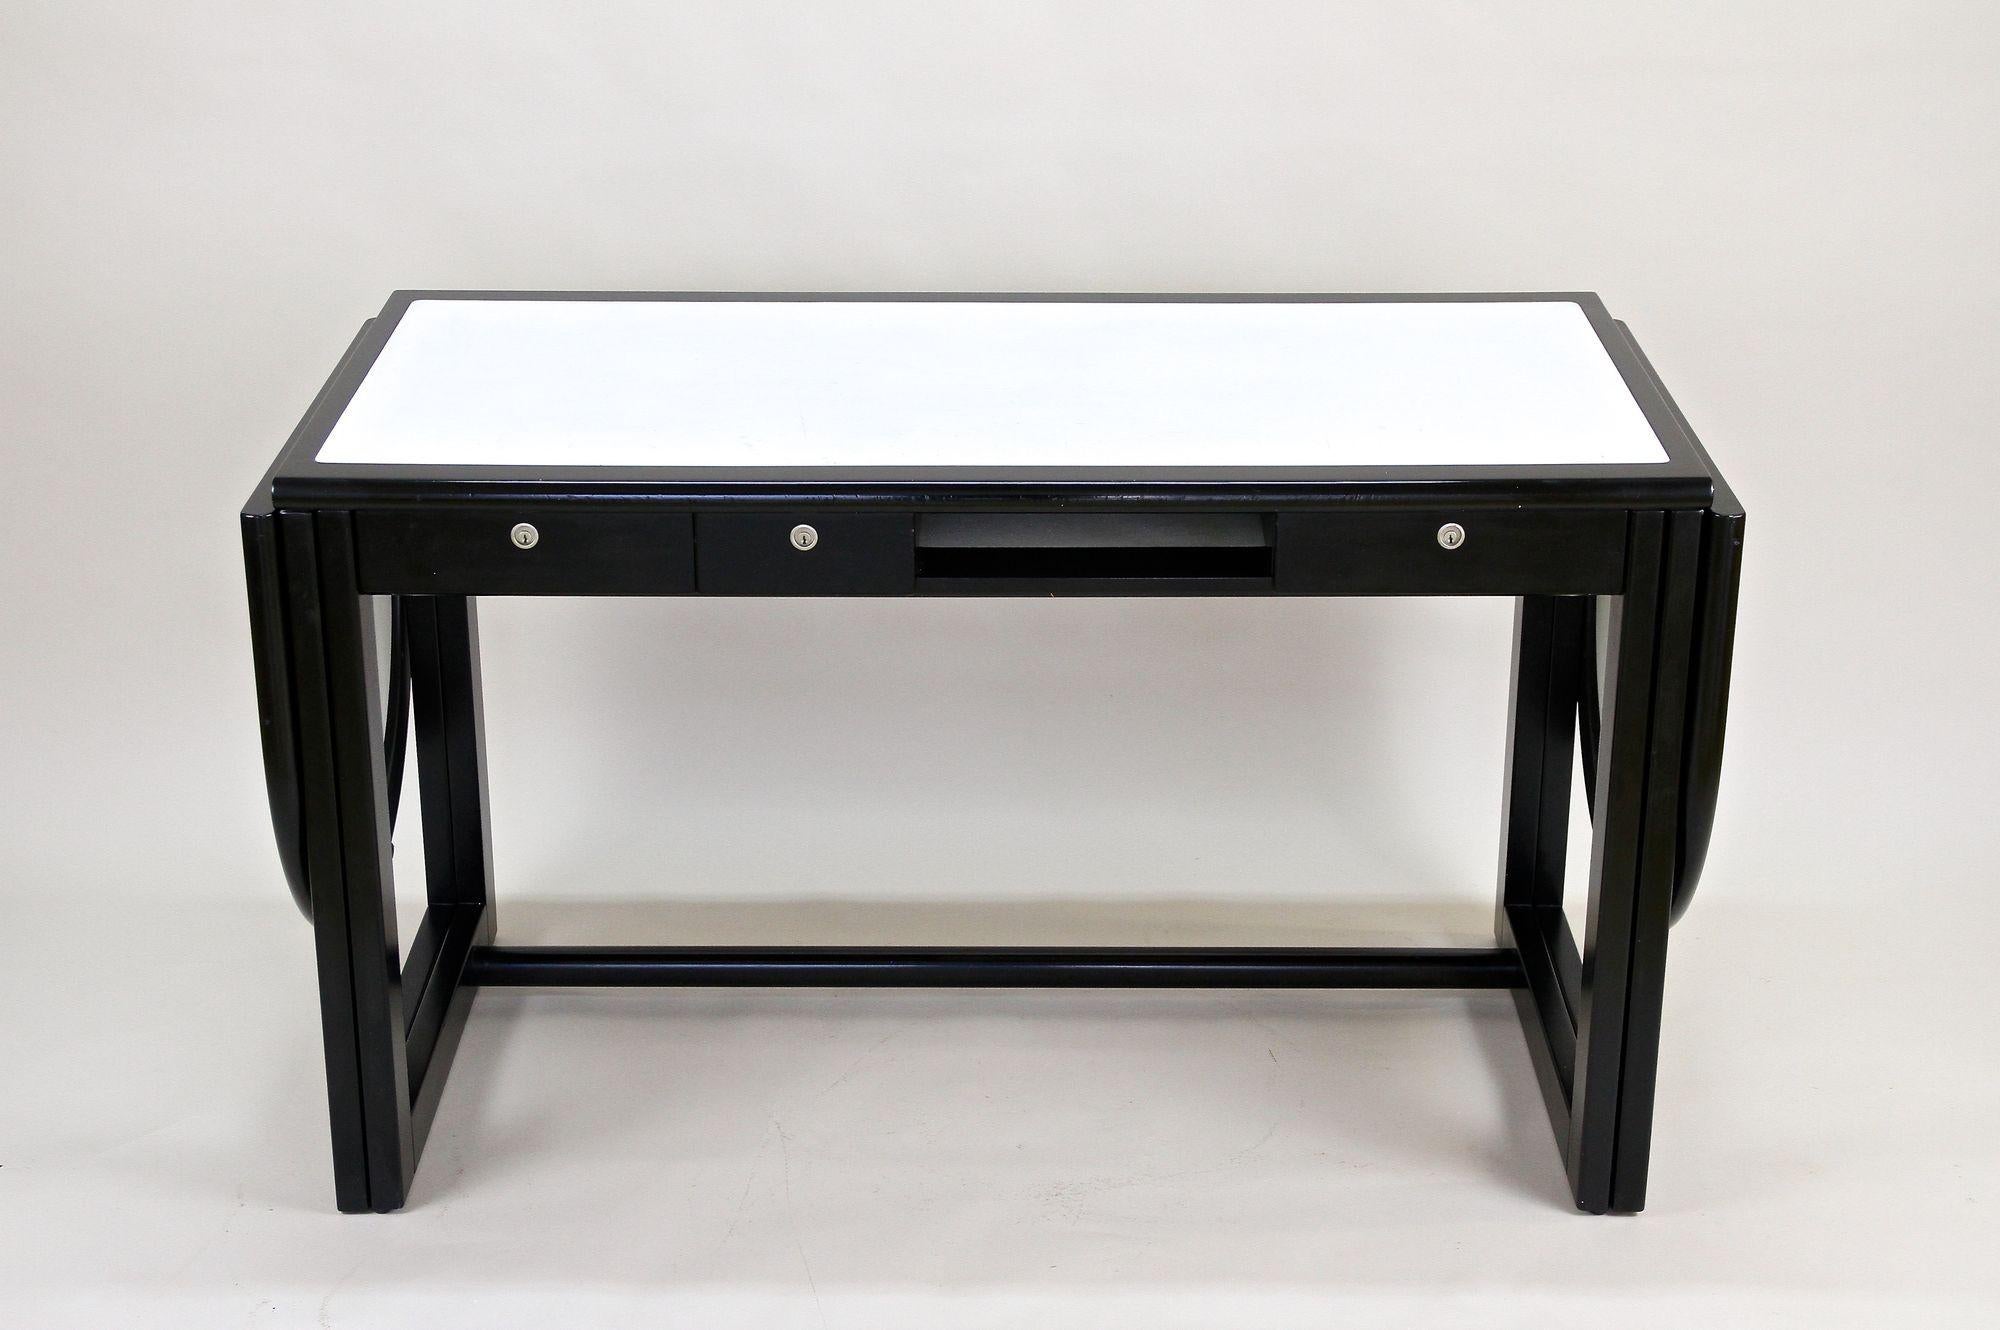 Fantastic black writing desk with white leather surface from the 1980s in Austria. Made by the renowed company of Thonet Austria, this contemporary office desk impresses with its extraordinary design, providing detachable flip-down leaves on each